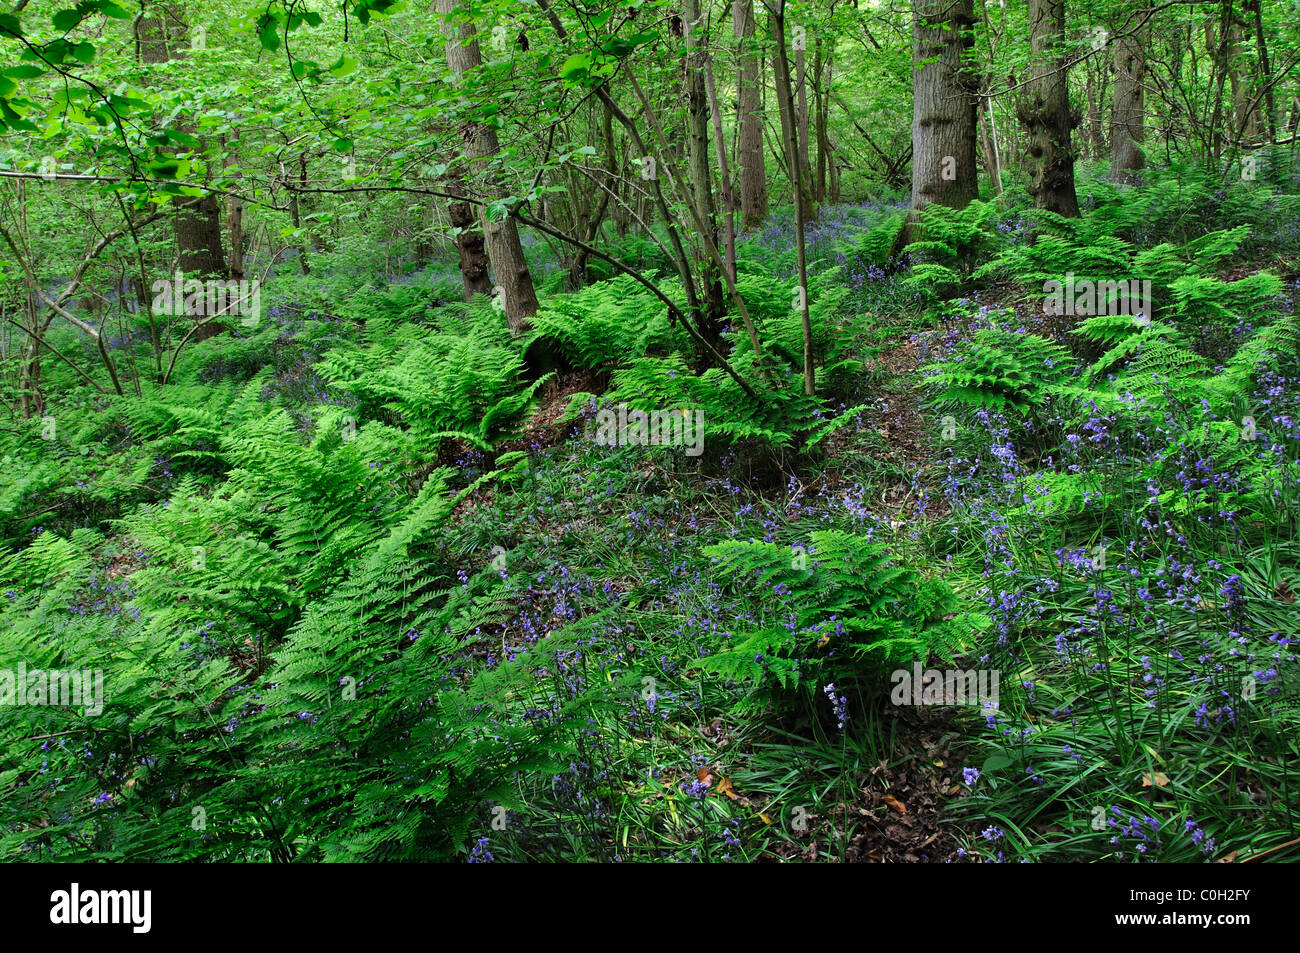 Freshly opened ferns in Ambrose Copse in spring. Wiltshire, UK May 2010 Stock Photo